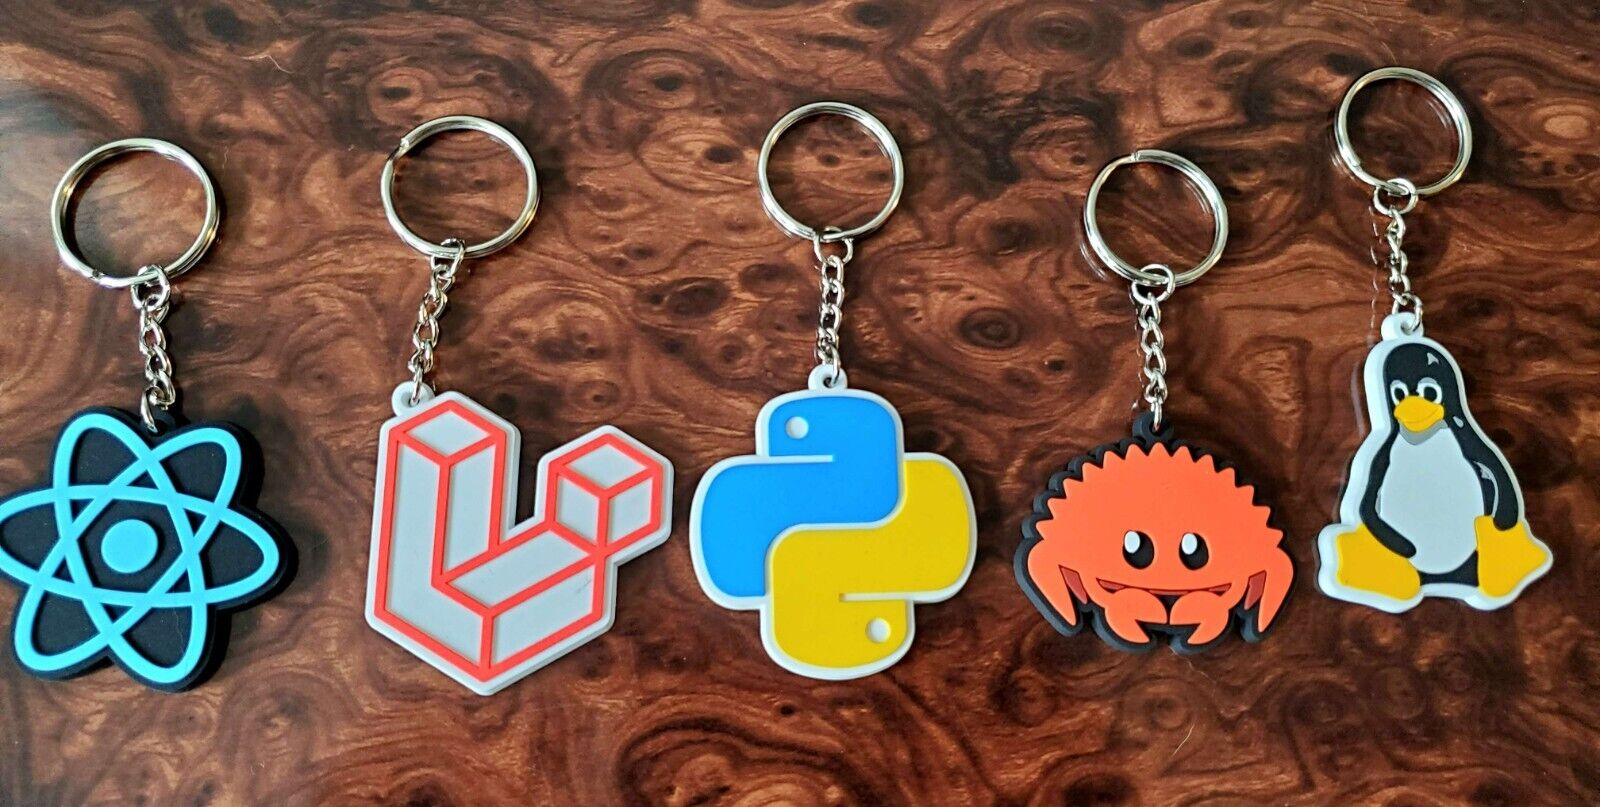 Programming Language Mascot PVC Keychains Great Gift for Software Developers